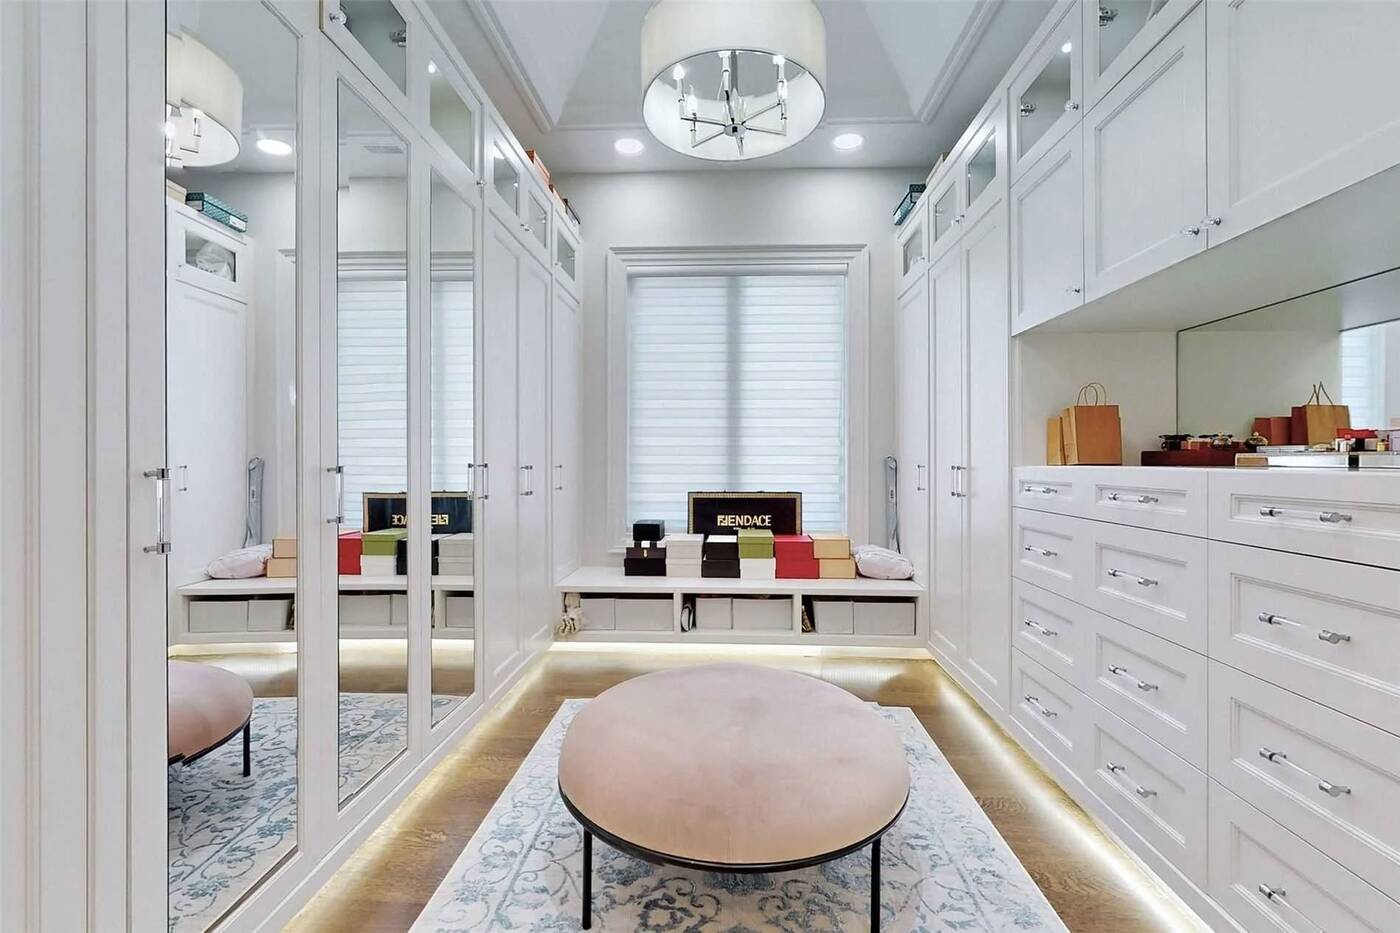 $14.8 million Toronto dream mansion comes with an astounding 11 bathrooms